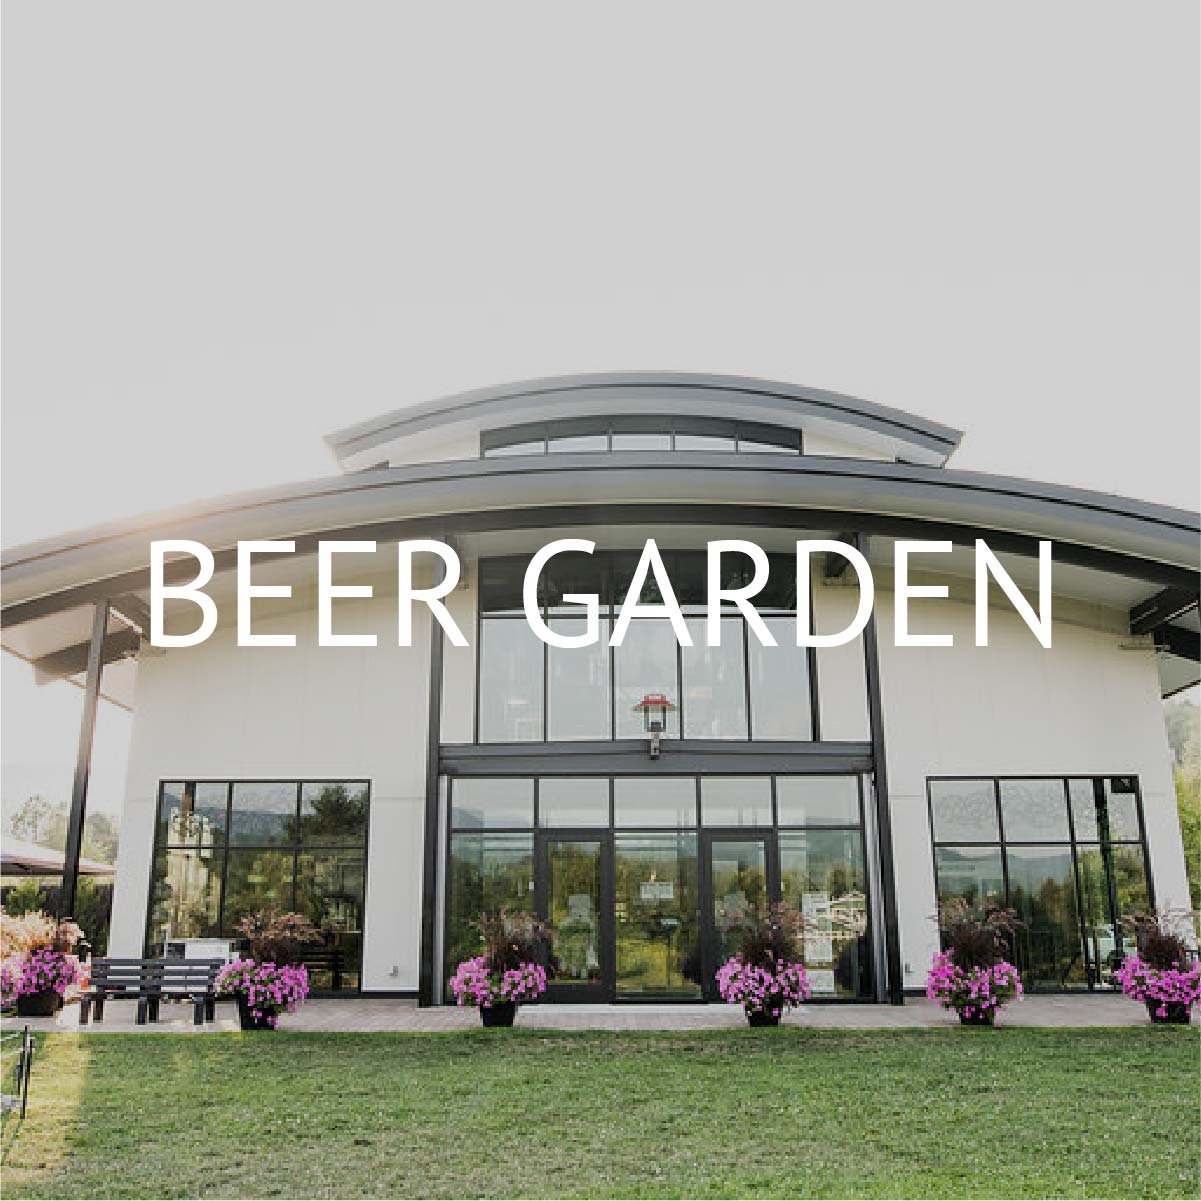 Click to learn more about the Outdoor Beer Garden at the Alchemist